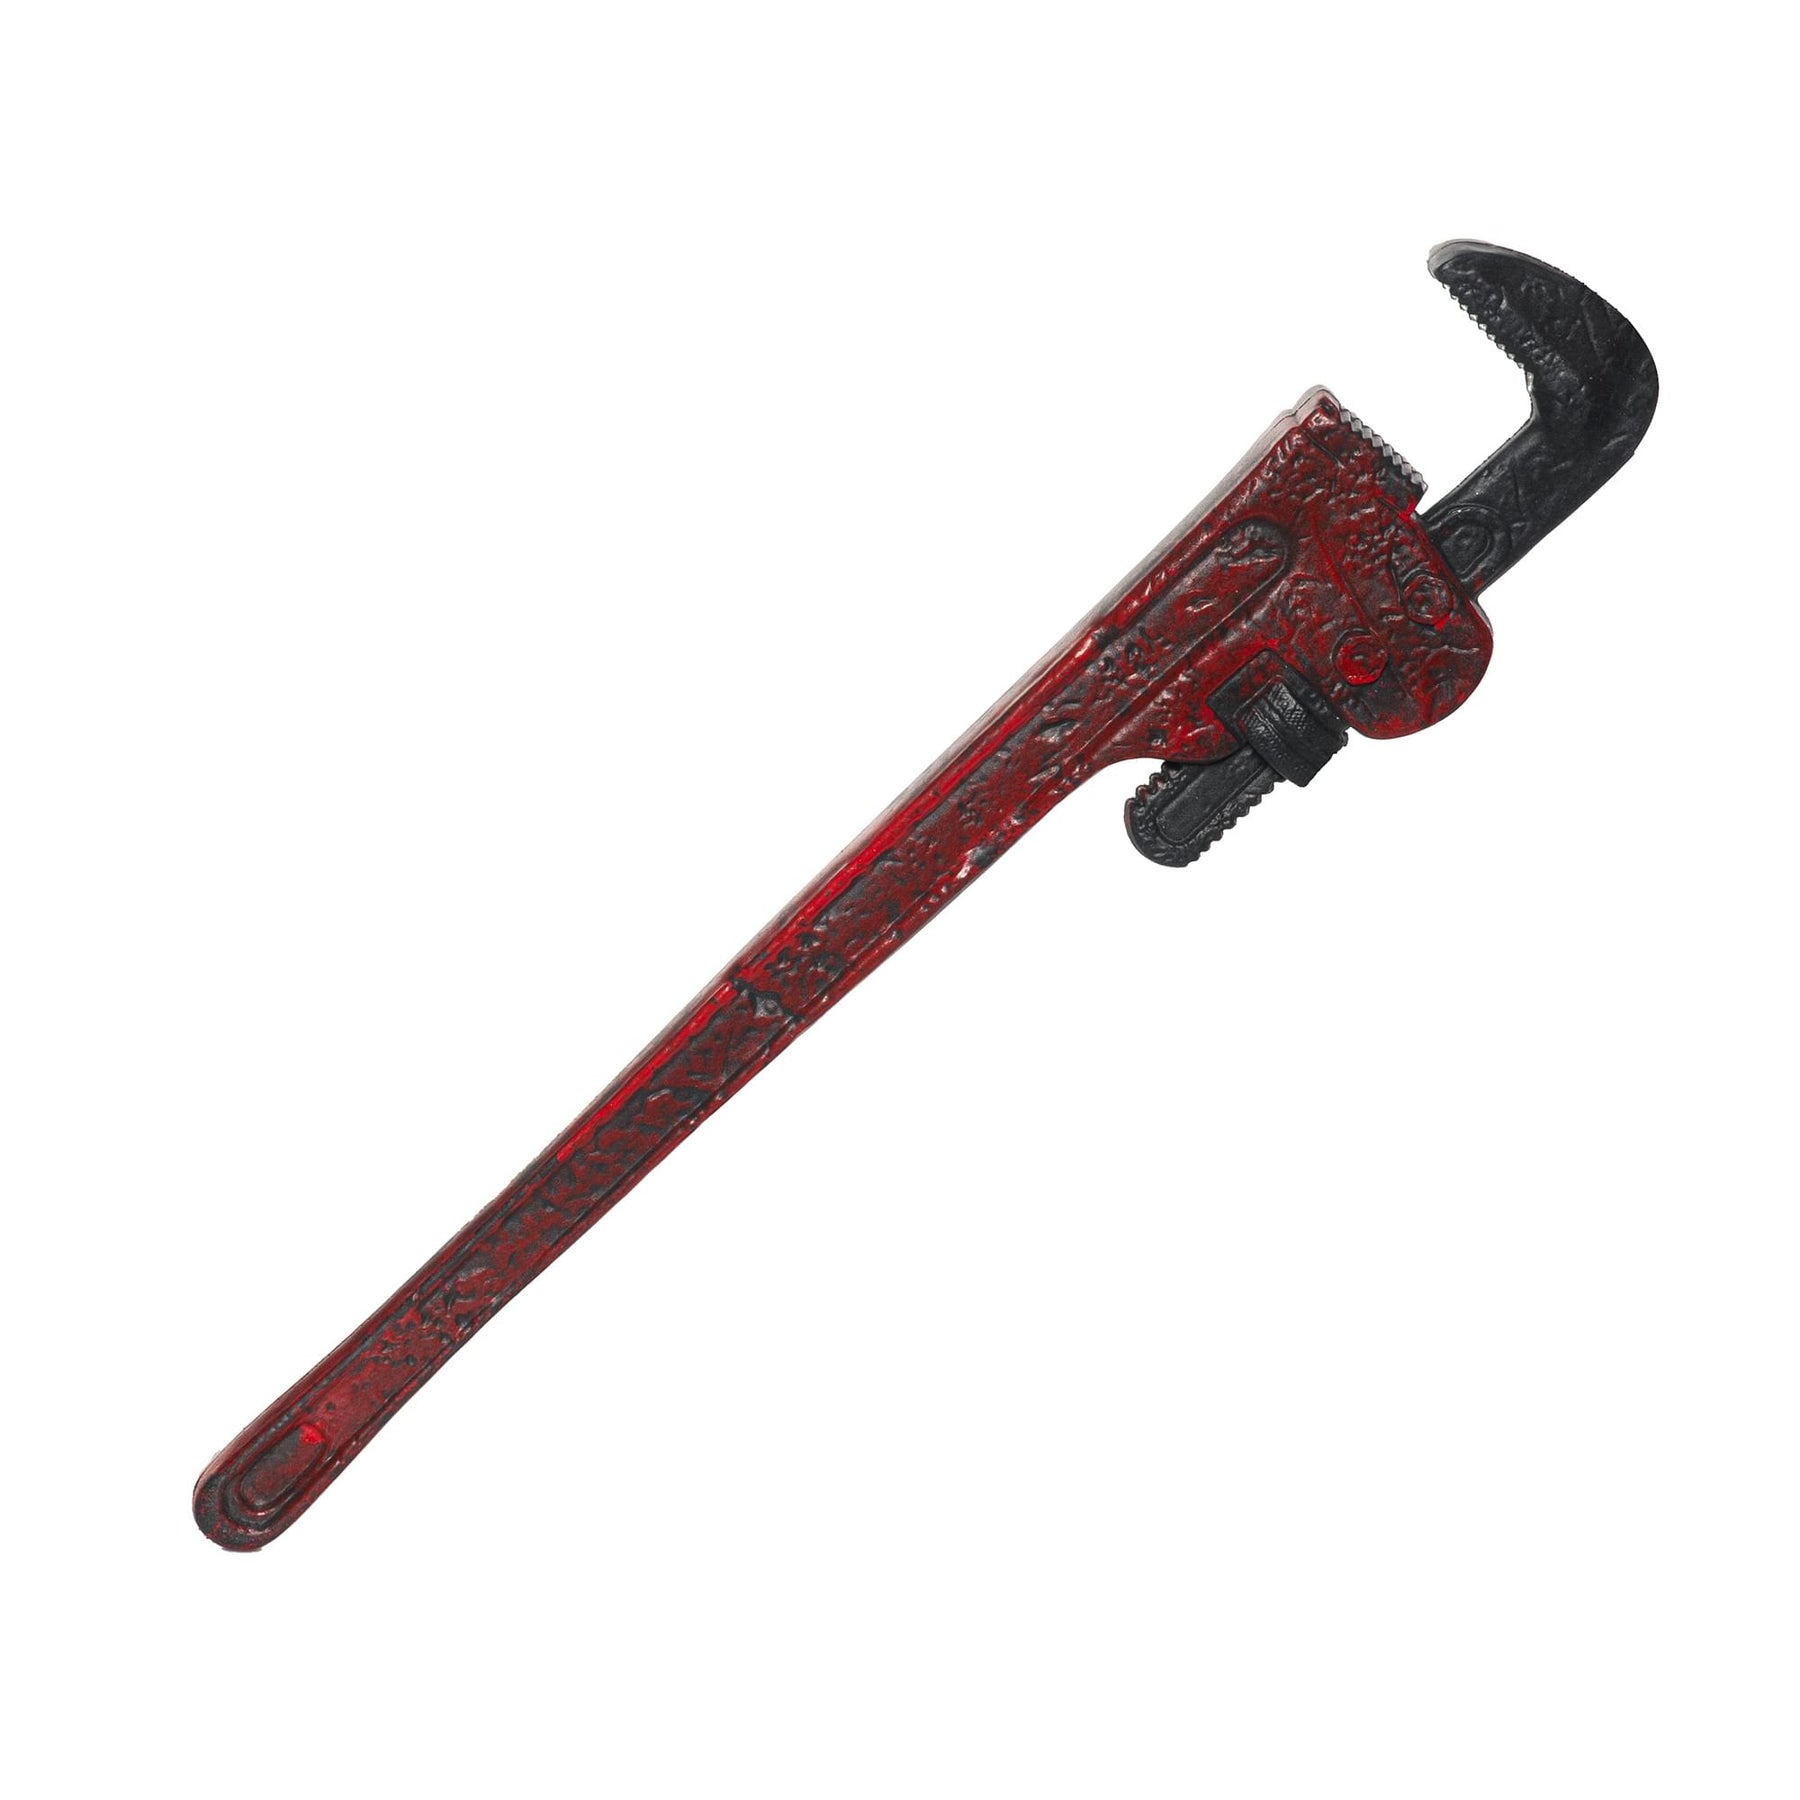 Bloody Wrench Adult Costume Accessory